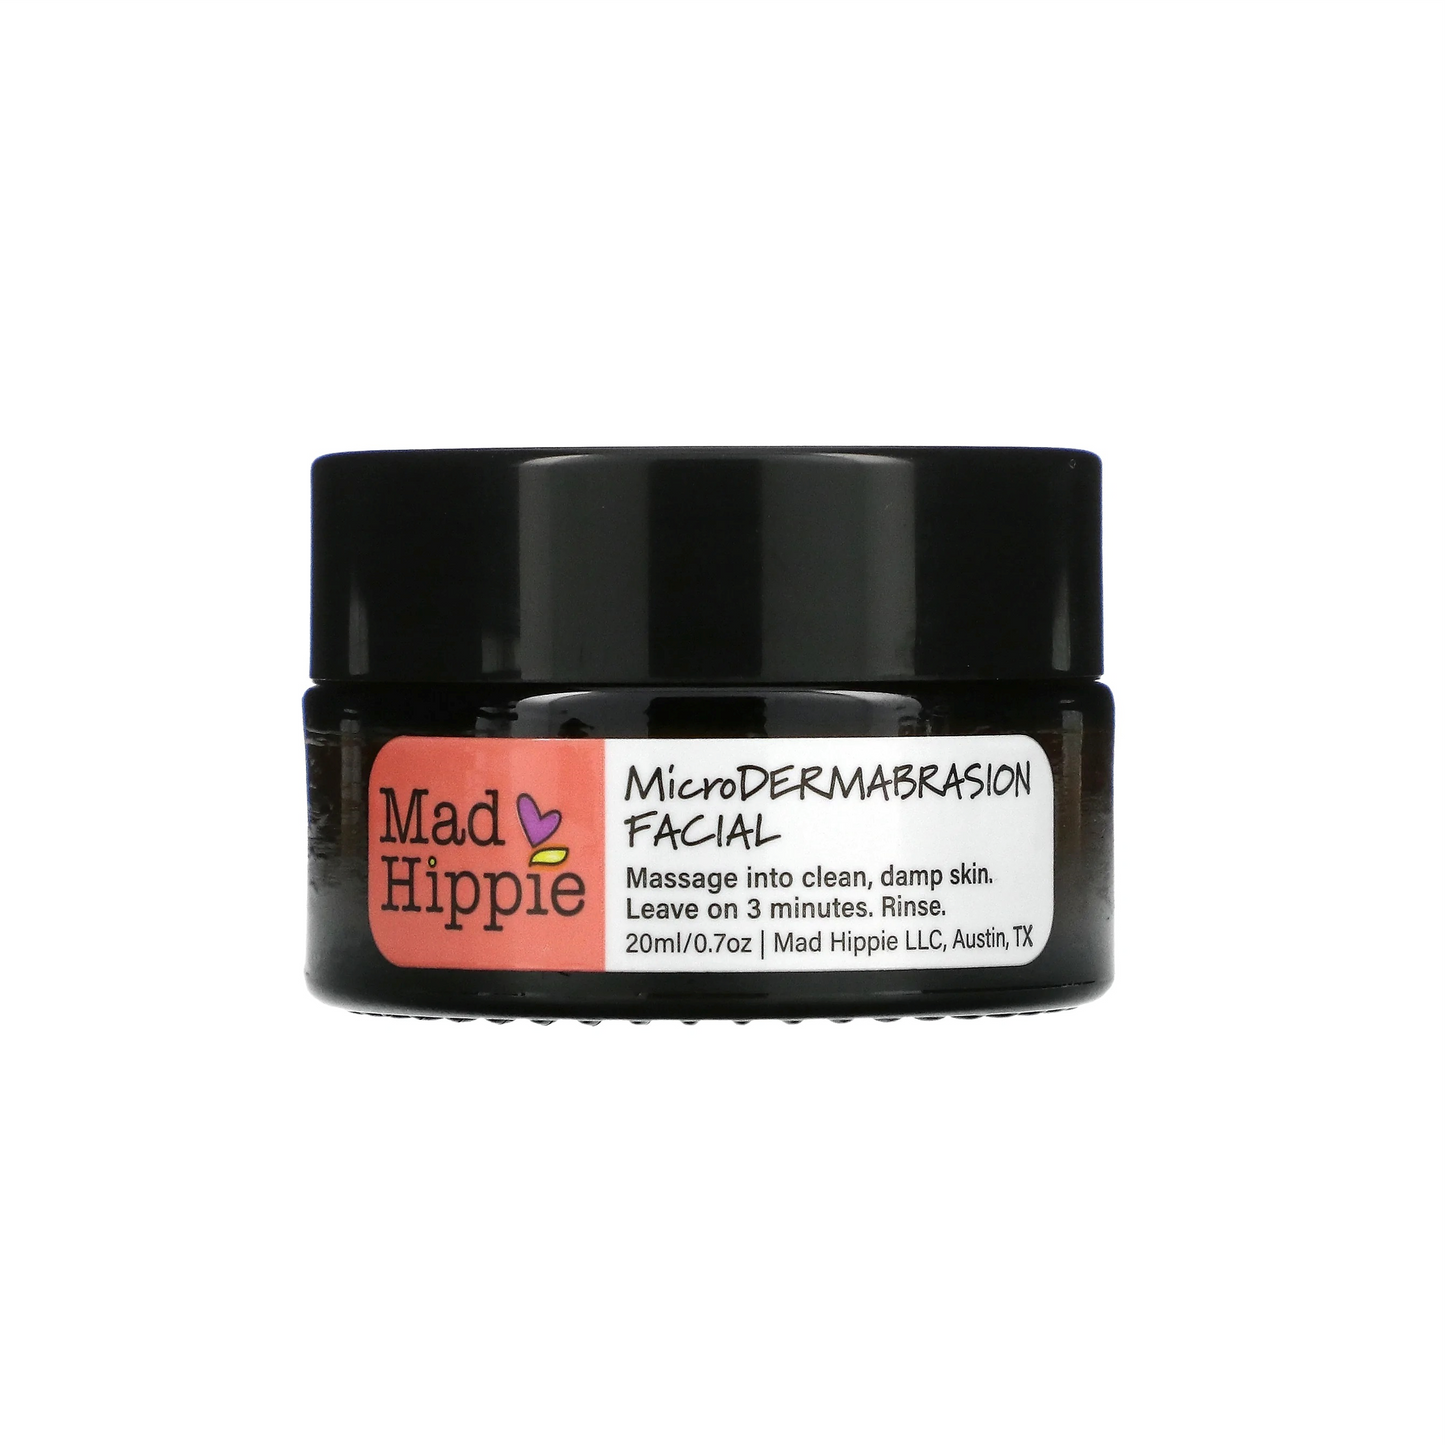 Mad Hippie Microdermabrasion Facial Deluxe 20ml